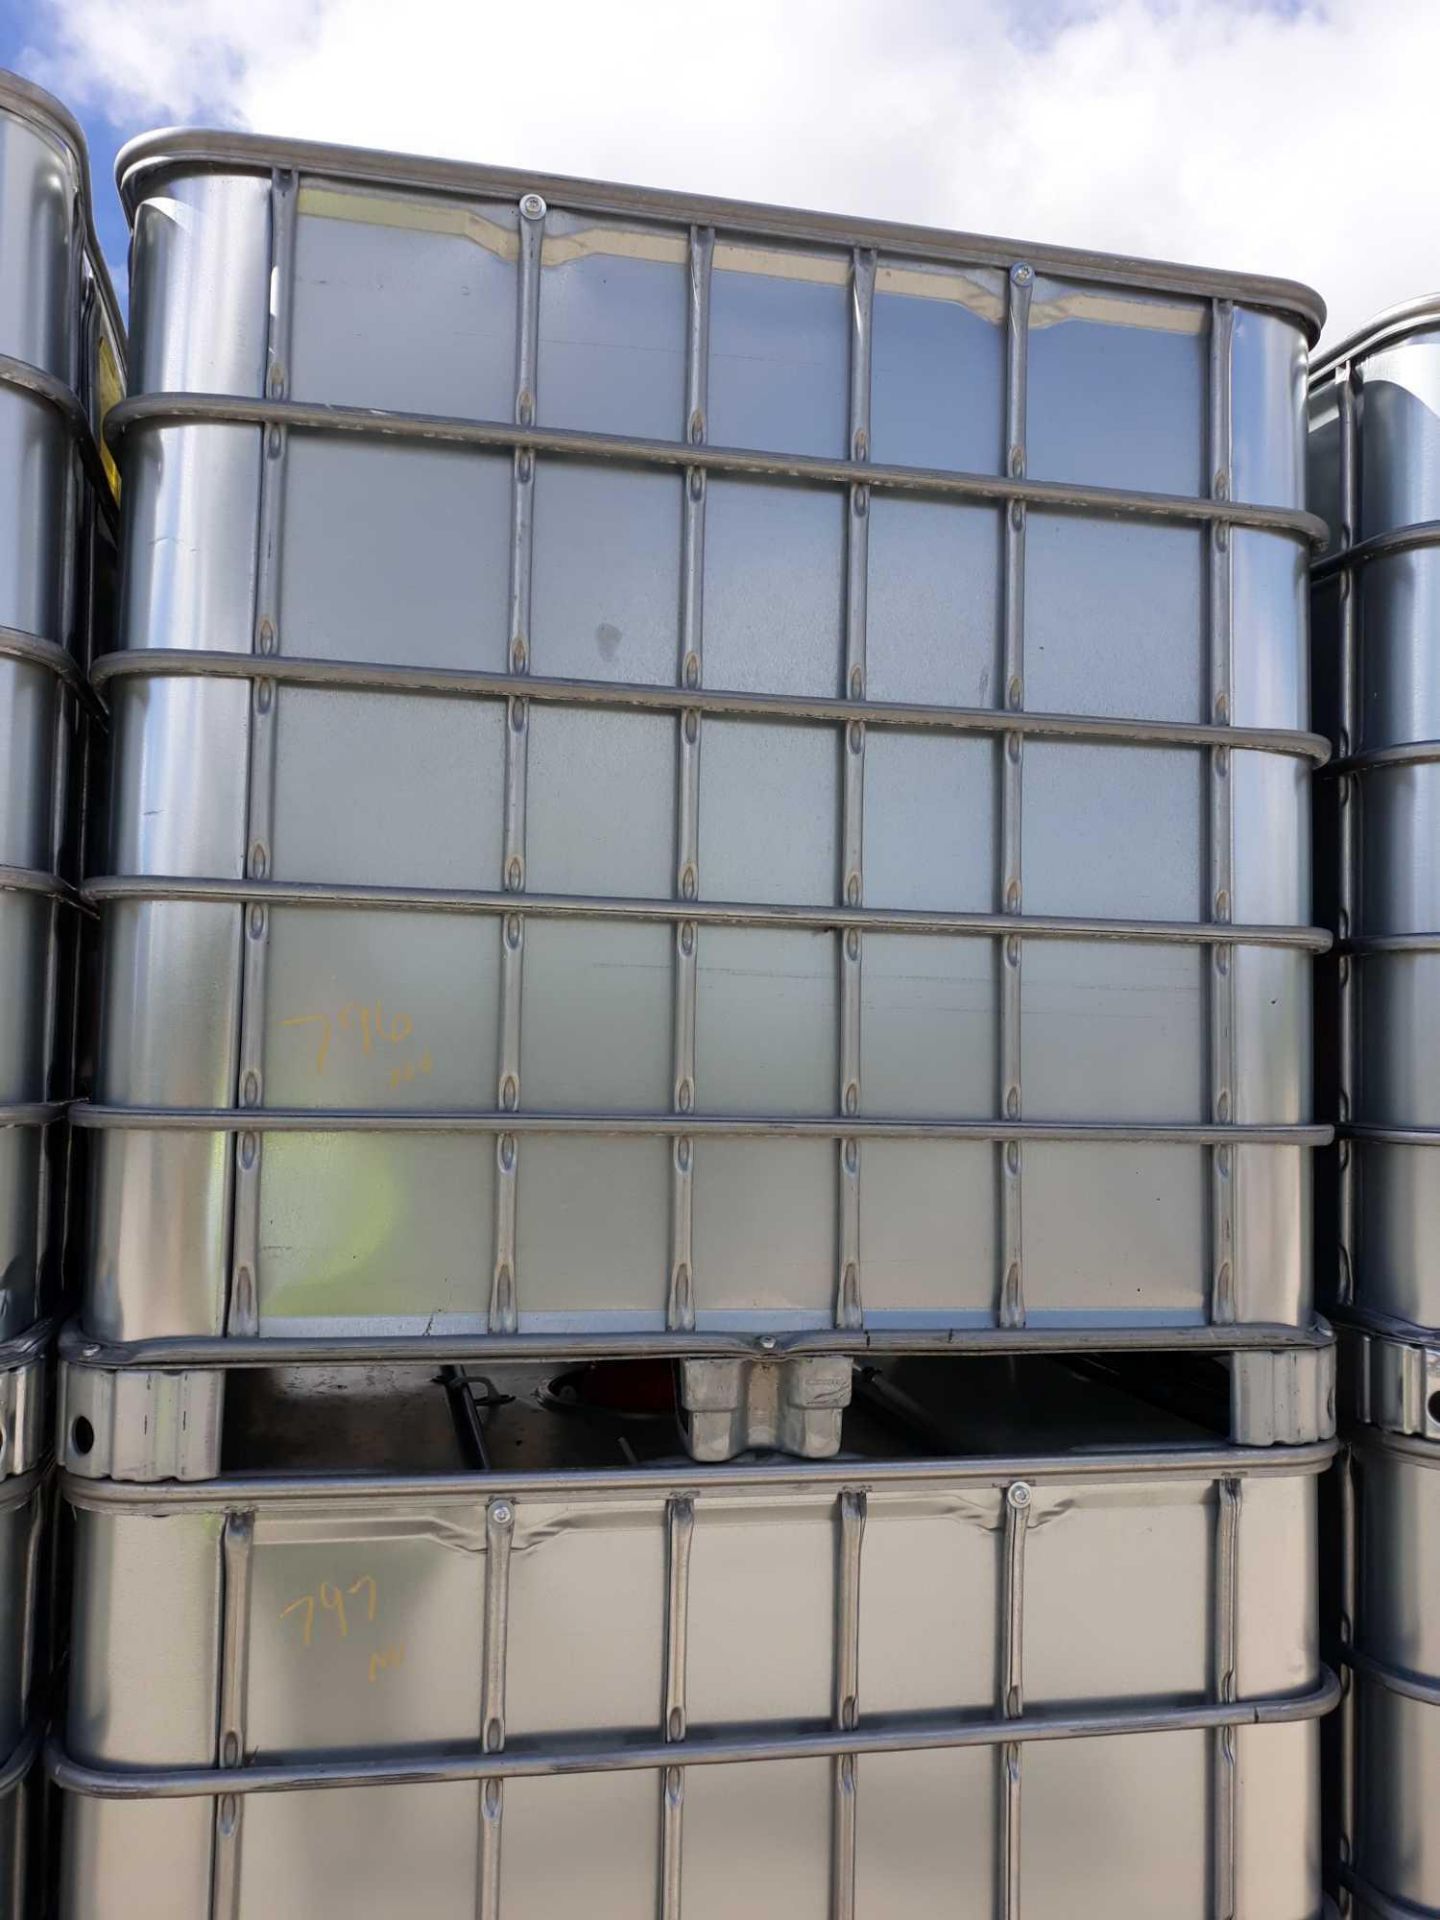 SILVER IBC TANK - CLEANED AND ATEX APPROVED